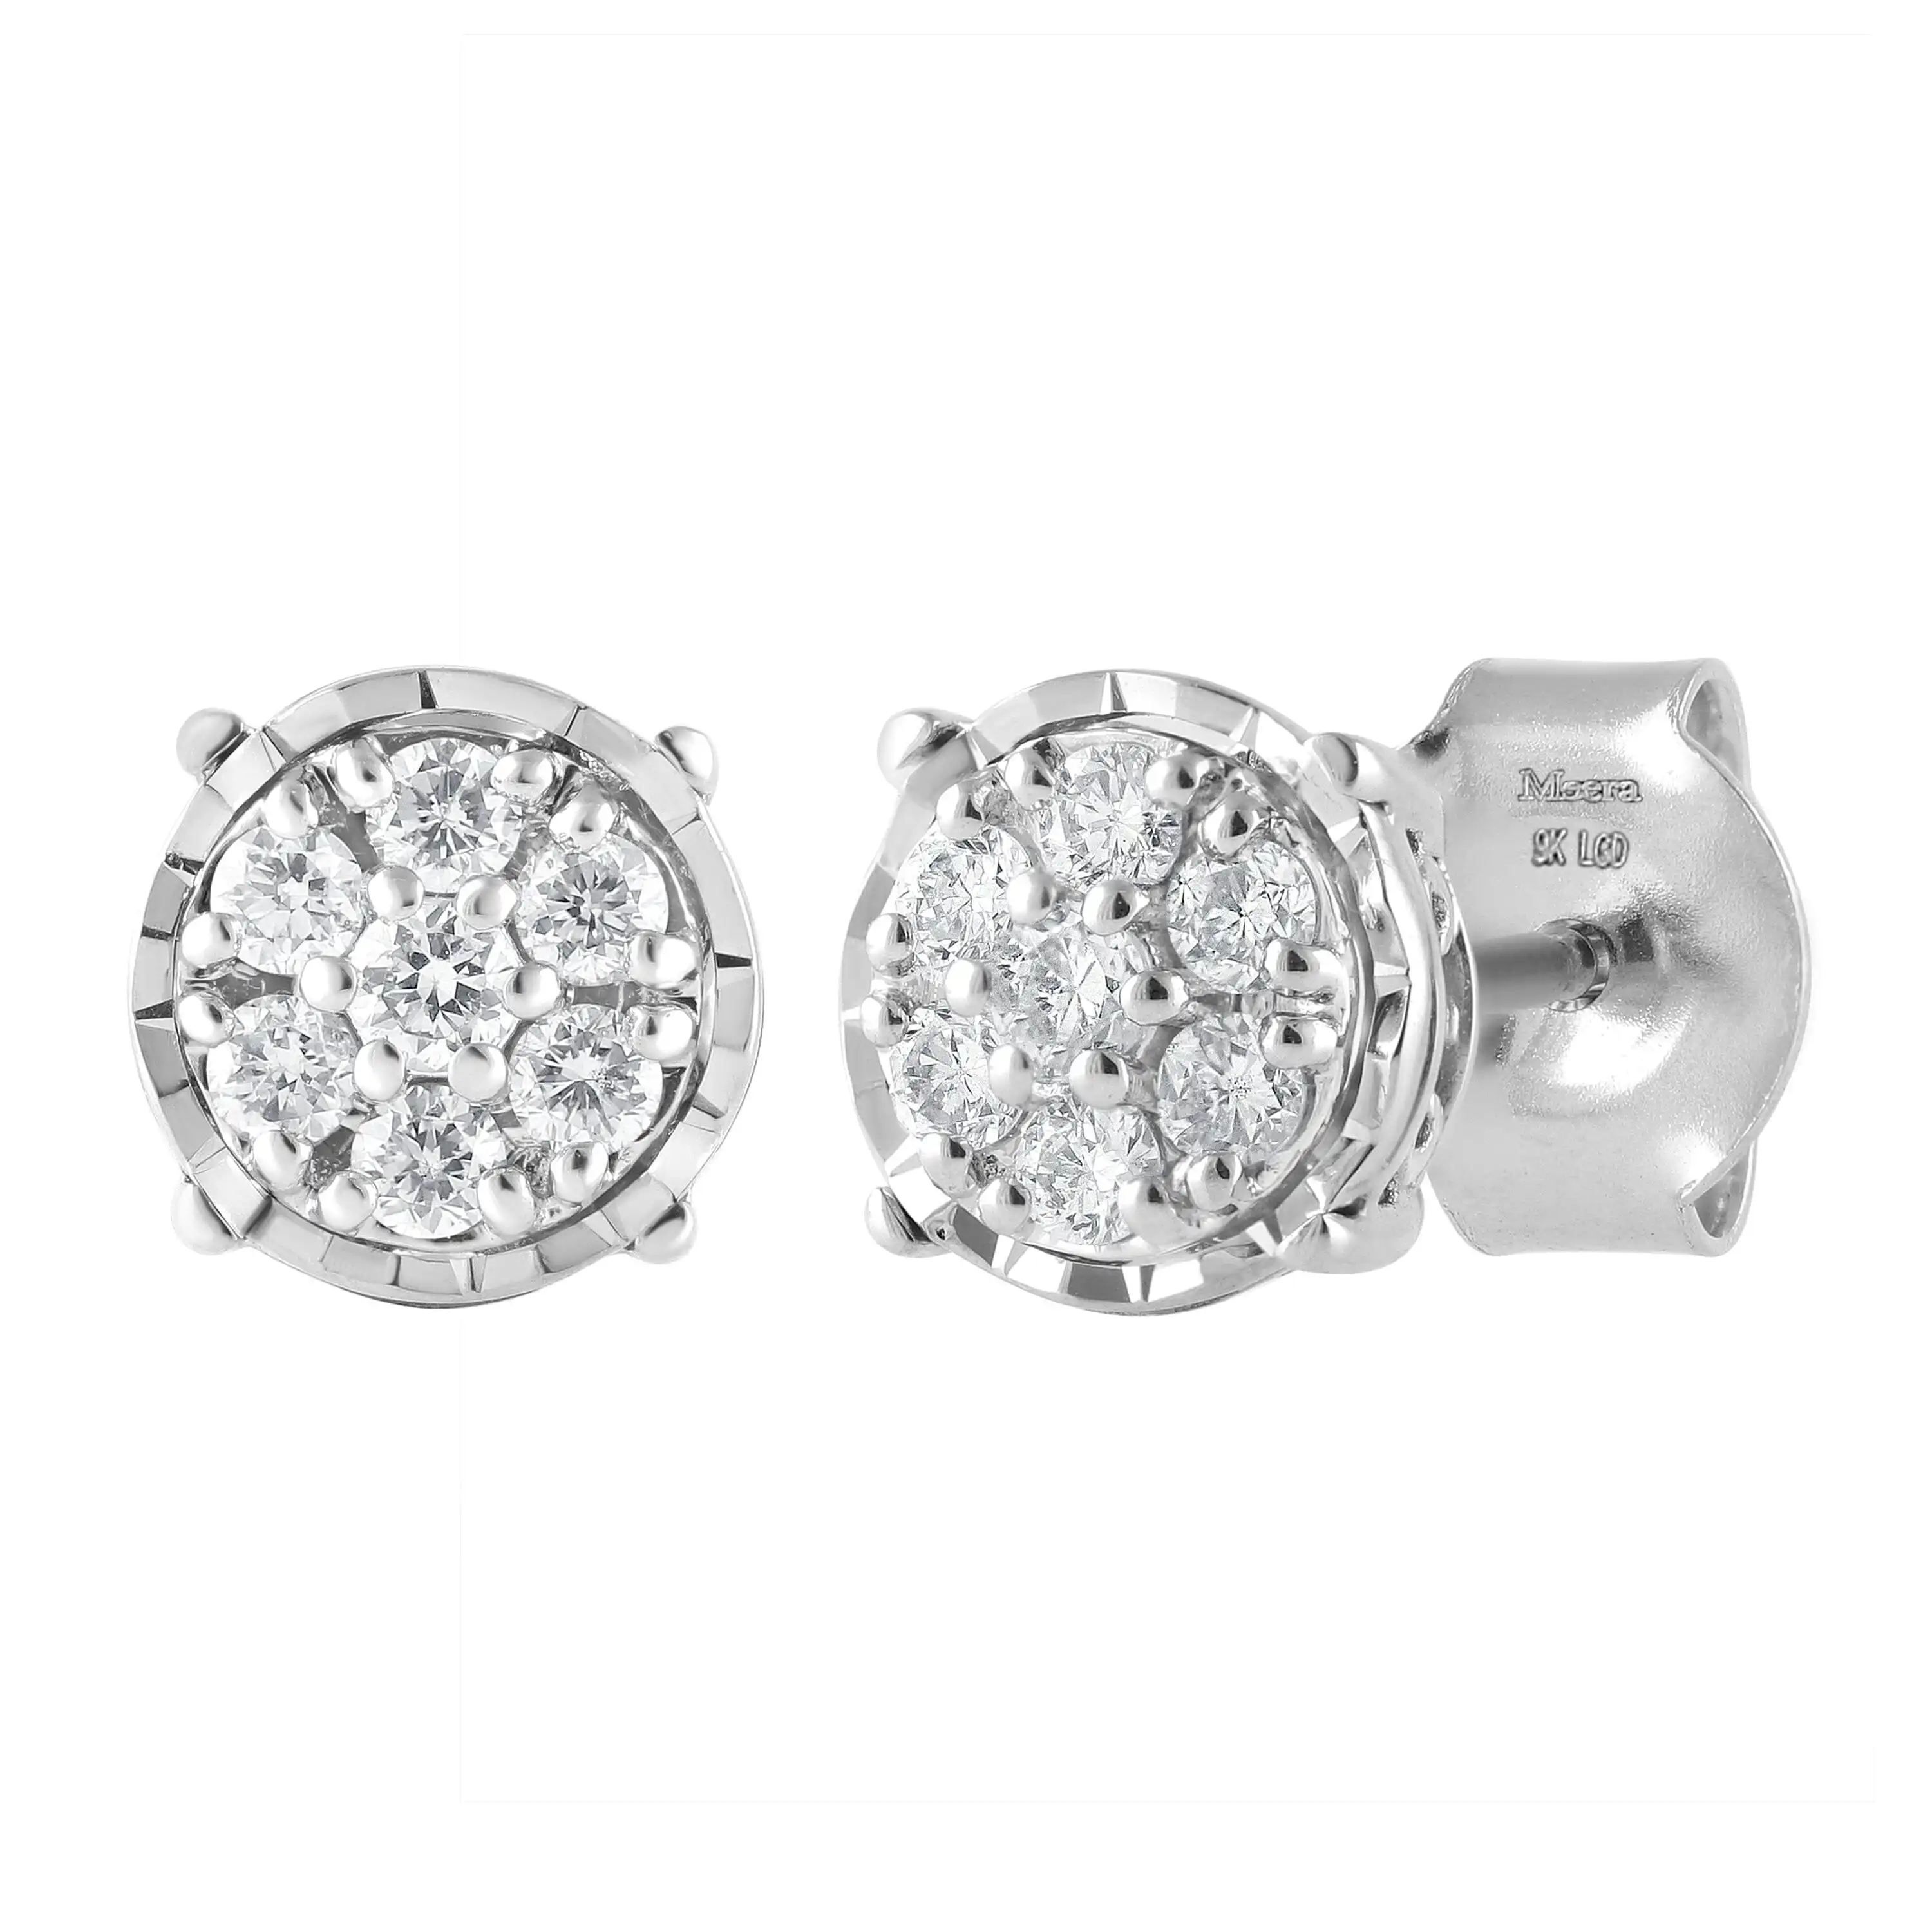 Meera Flower Earrings with 1/5ct of Laboratory Grown Diamonds in 9ct White Gold